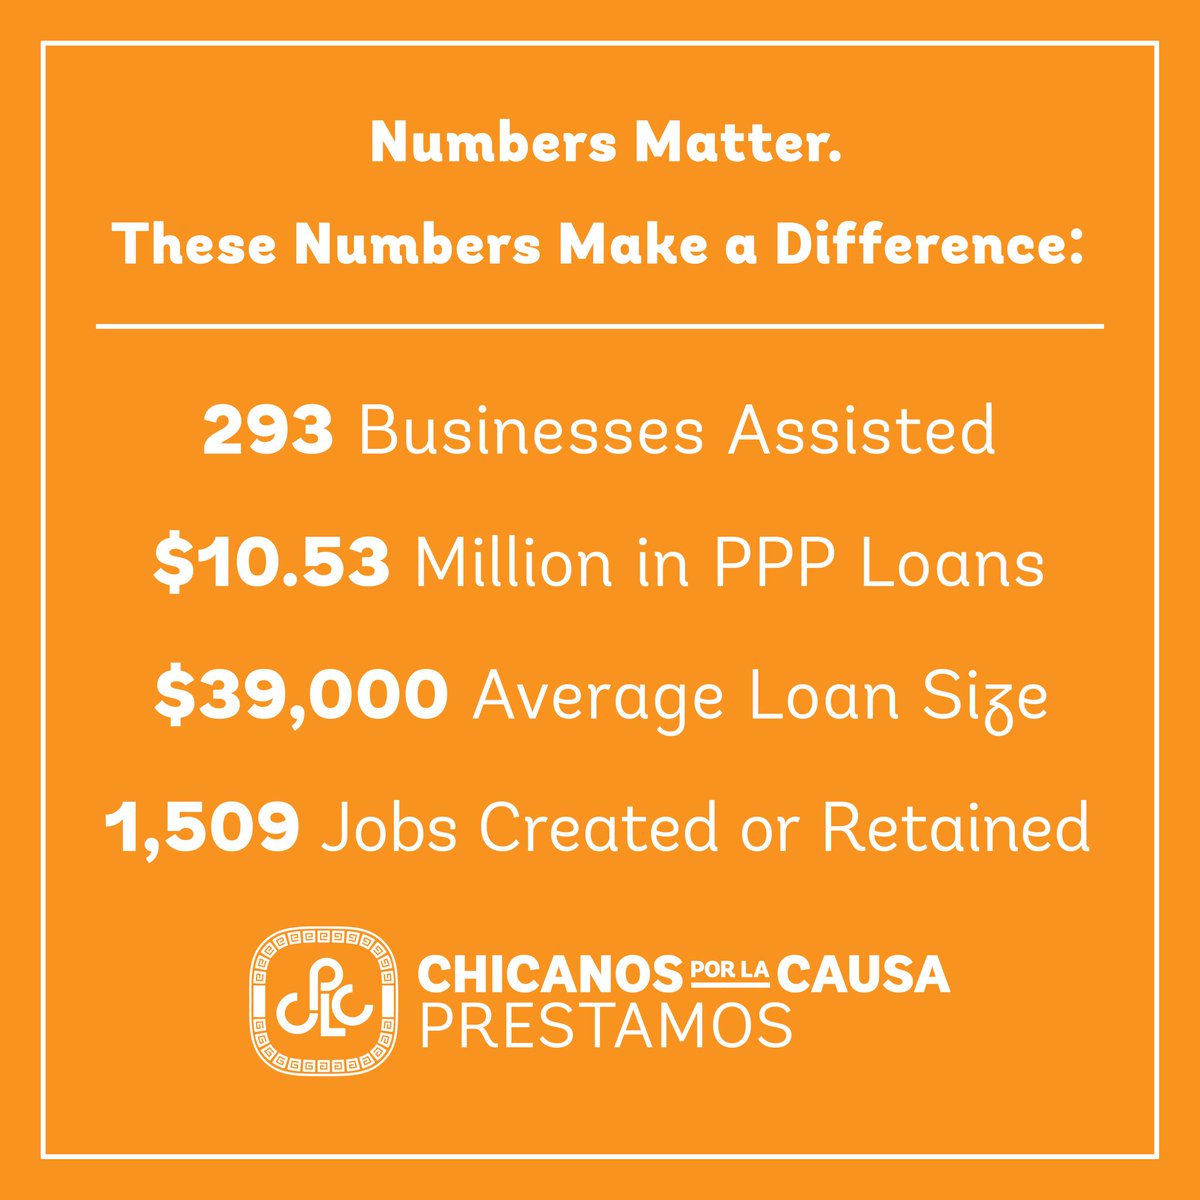 During #COVID19Pandemic, @PrestamosCDFI is making a big difference for #SmallBusinesses in Arizona. #NumbersMatter ⬇️